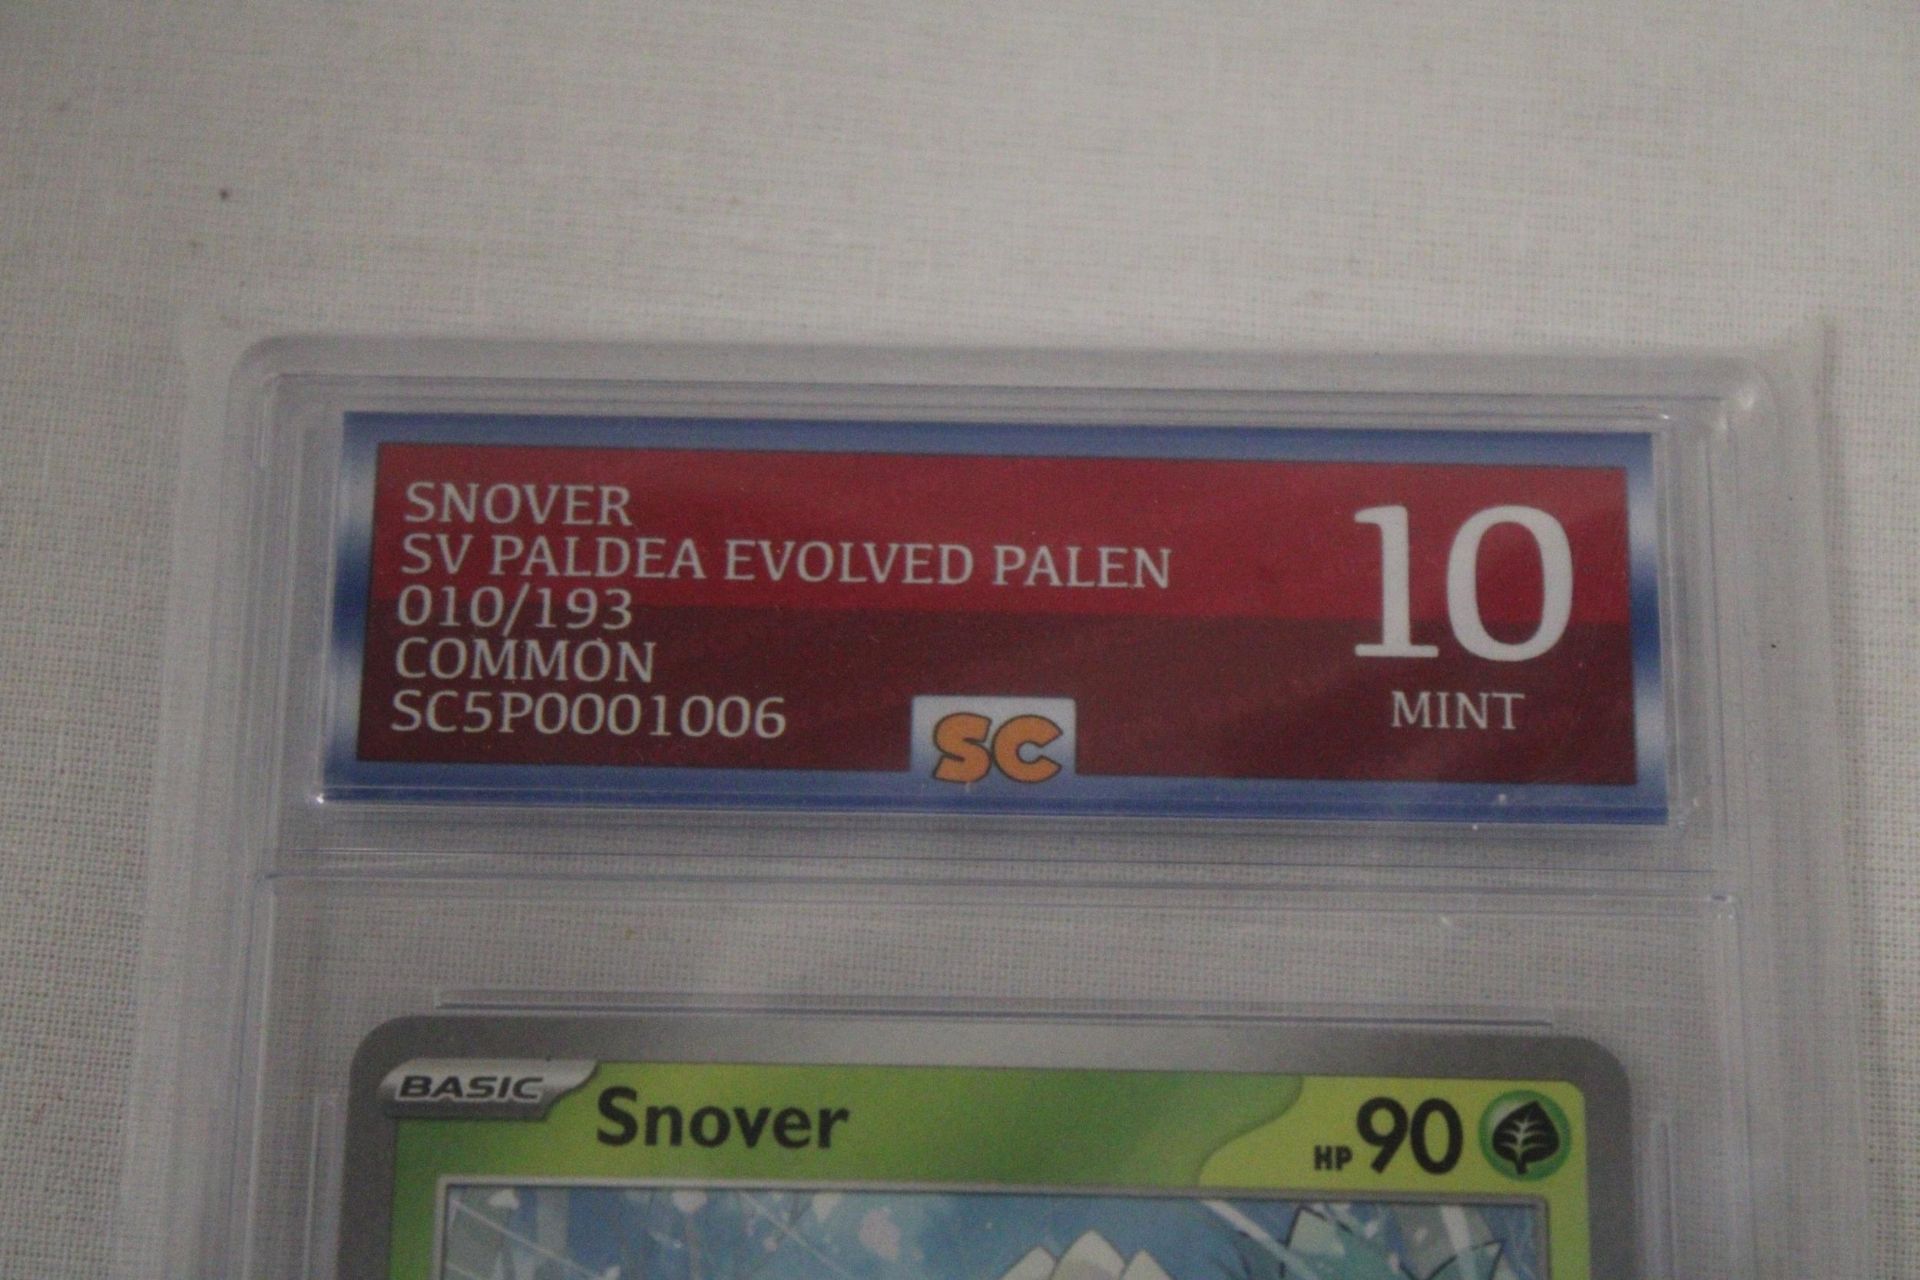 A GRADED POKEMON CARD 10/10 SNOVER - Image 3 of 4